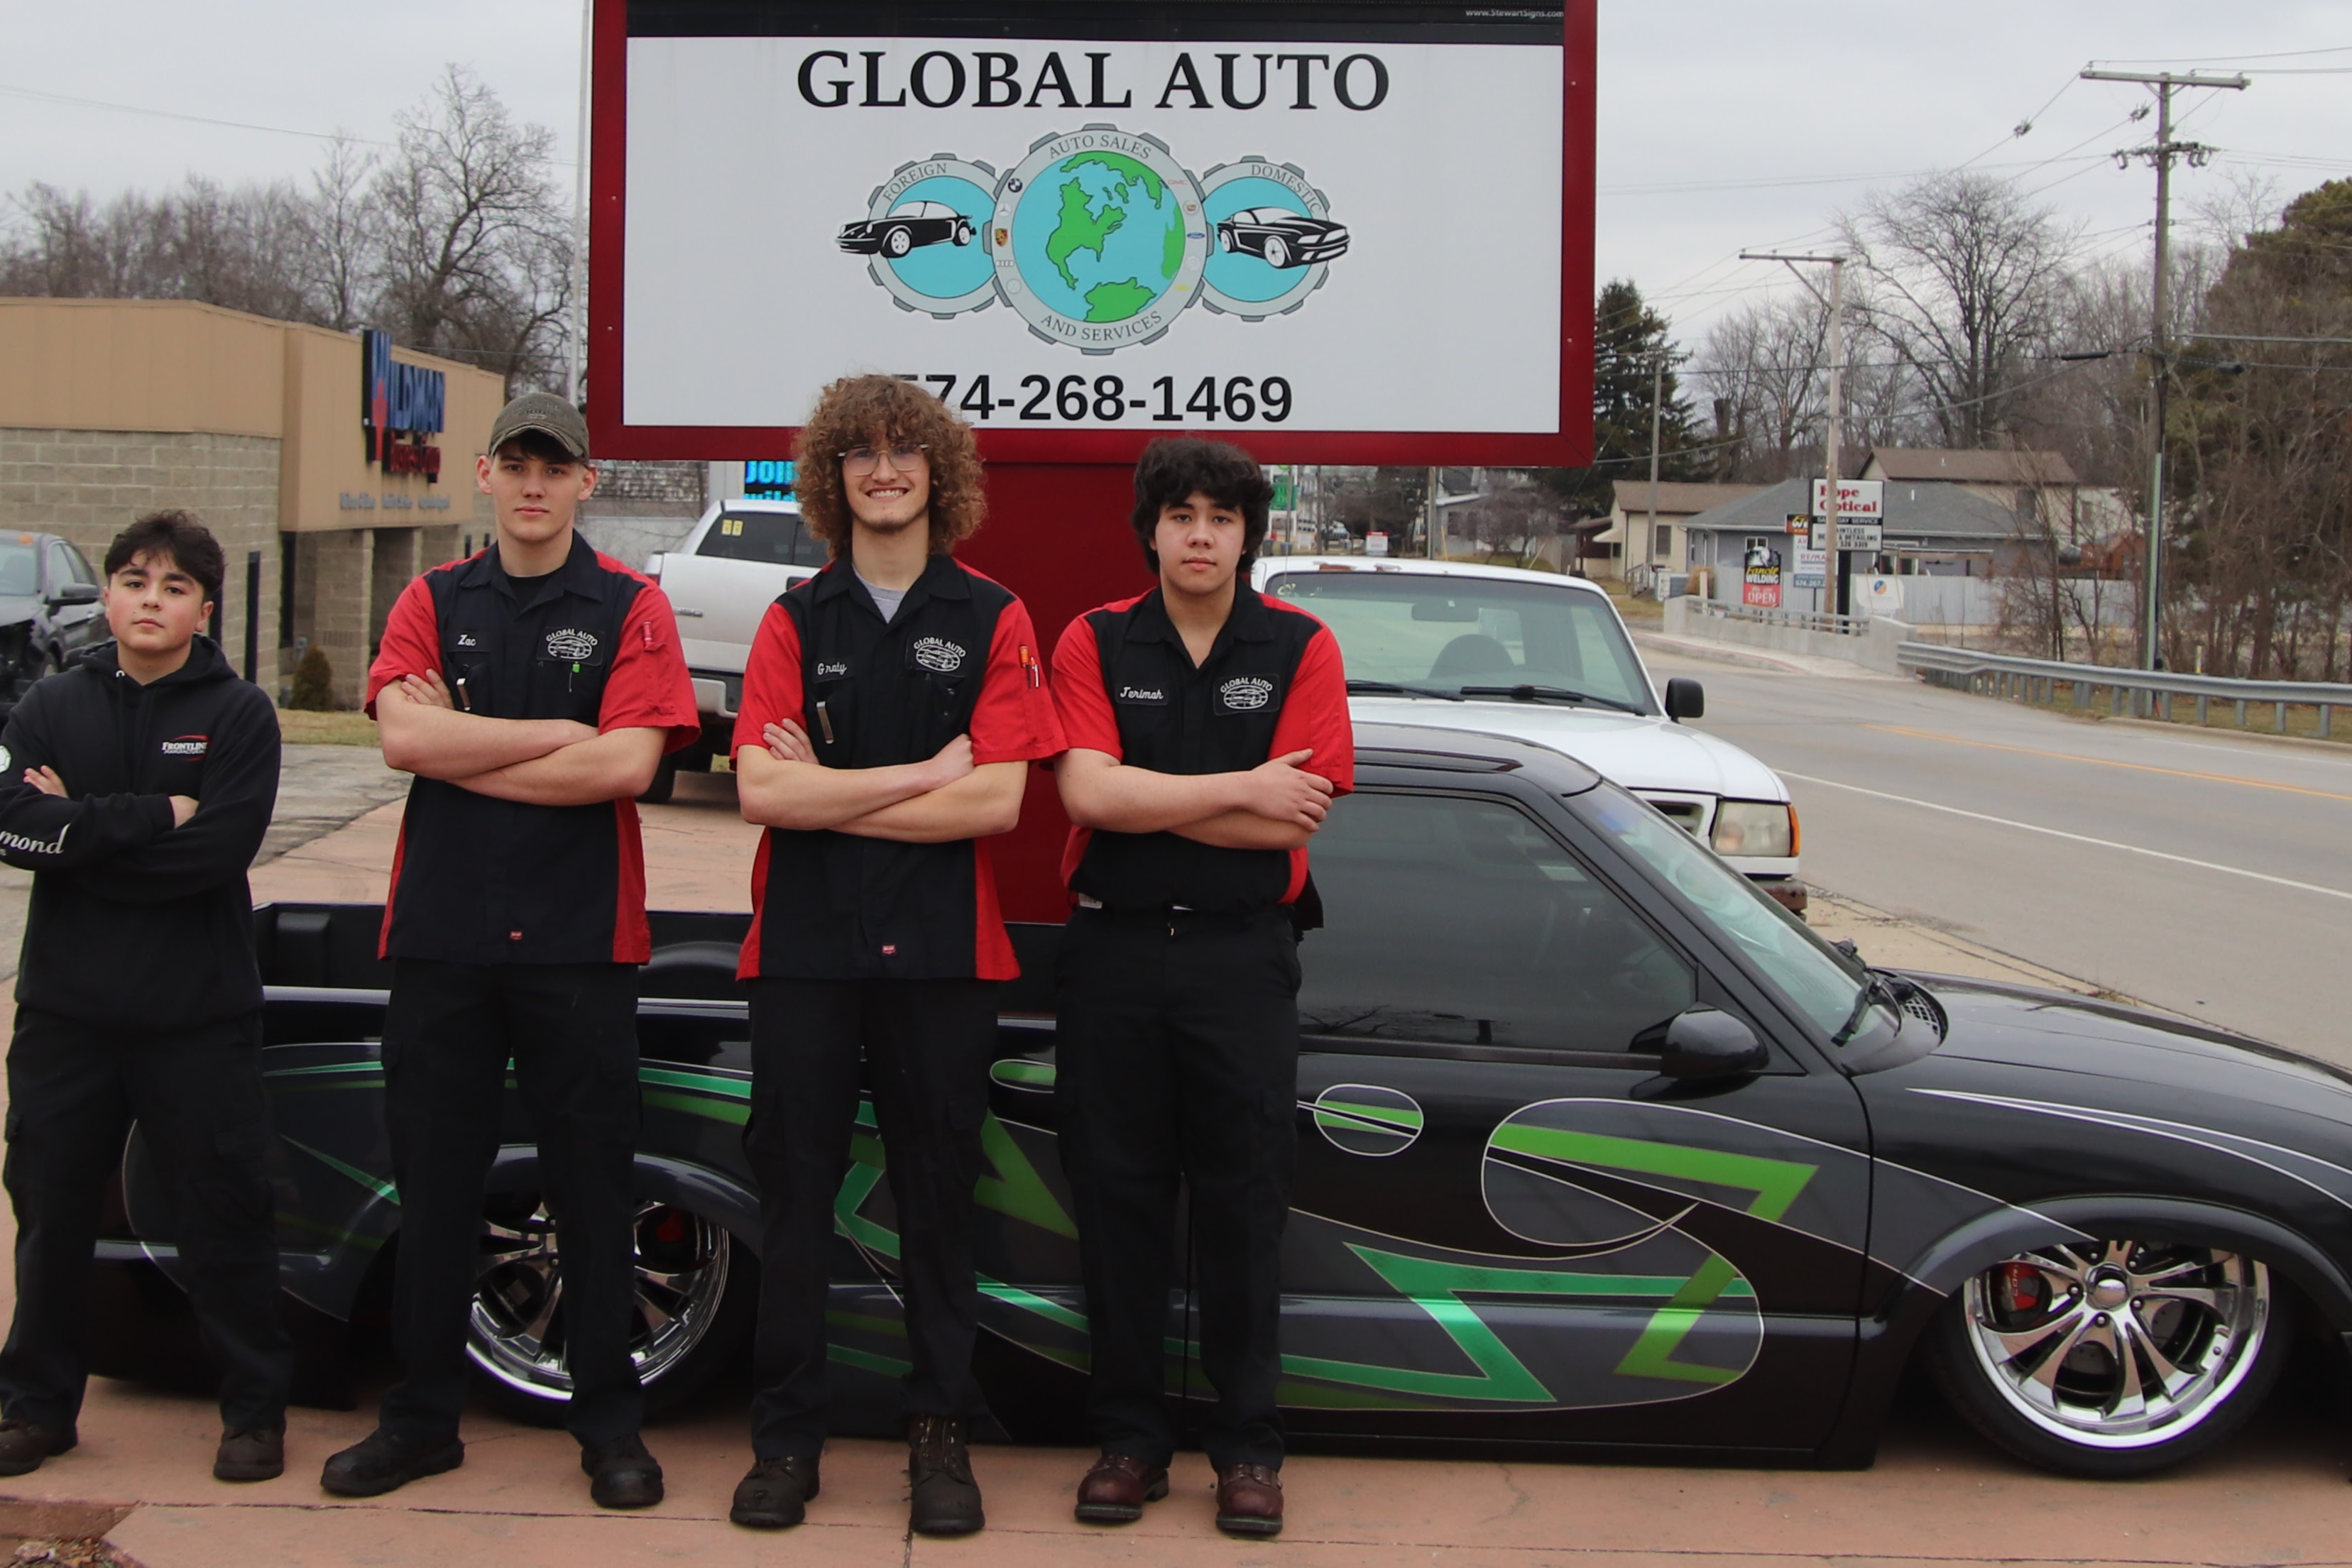 students posing with a sports car under global auto sign